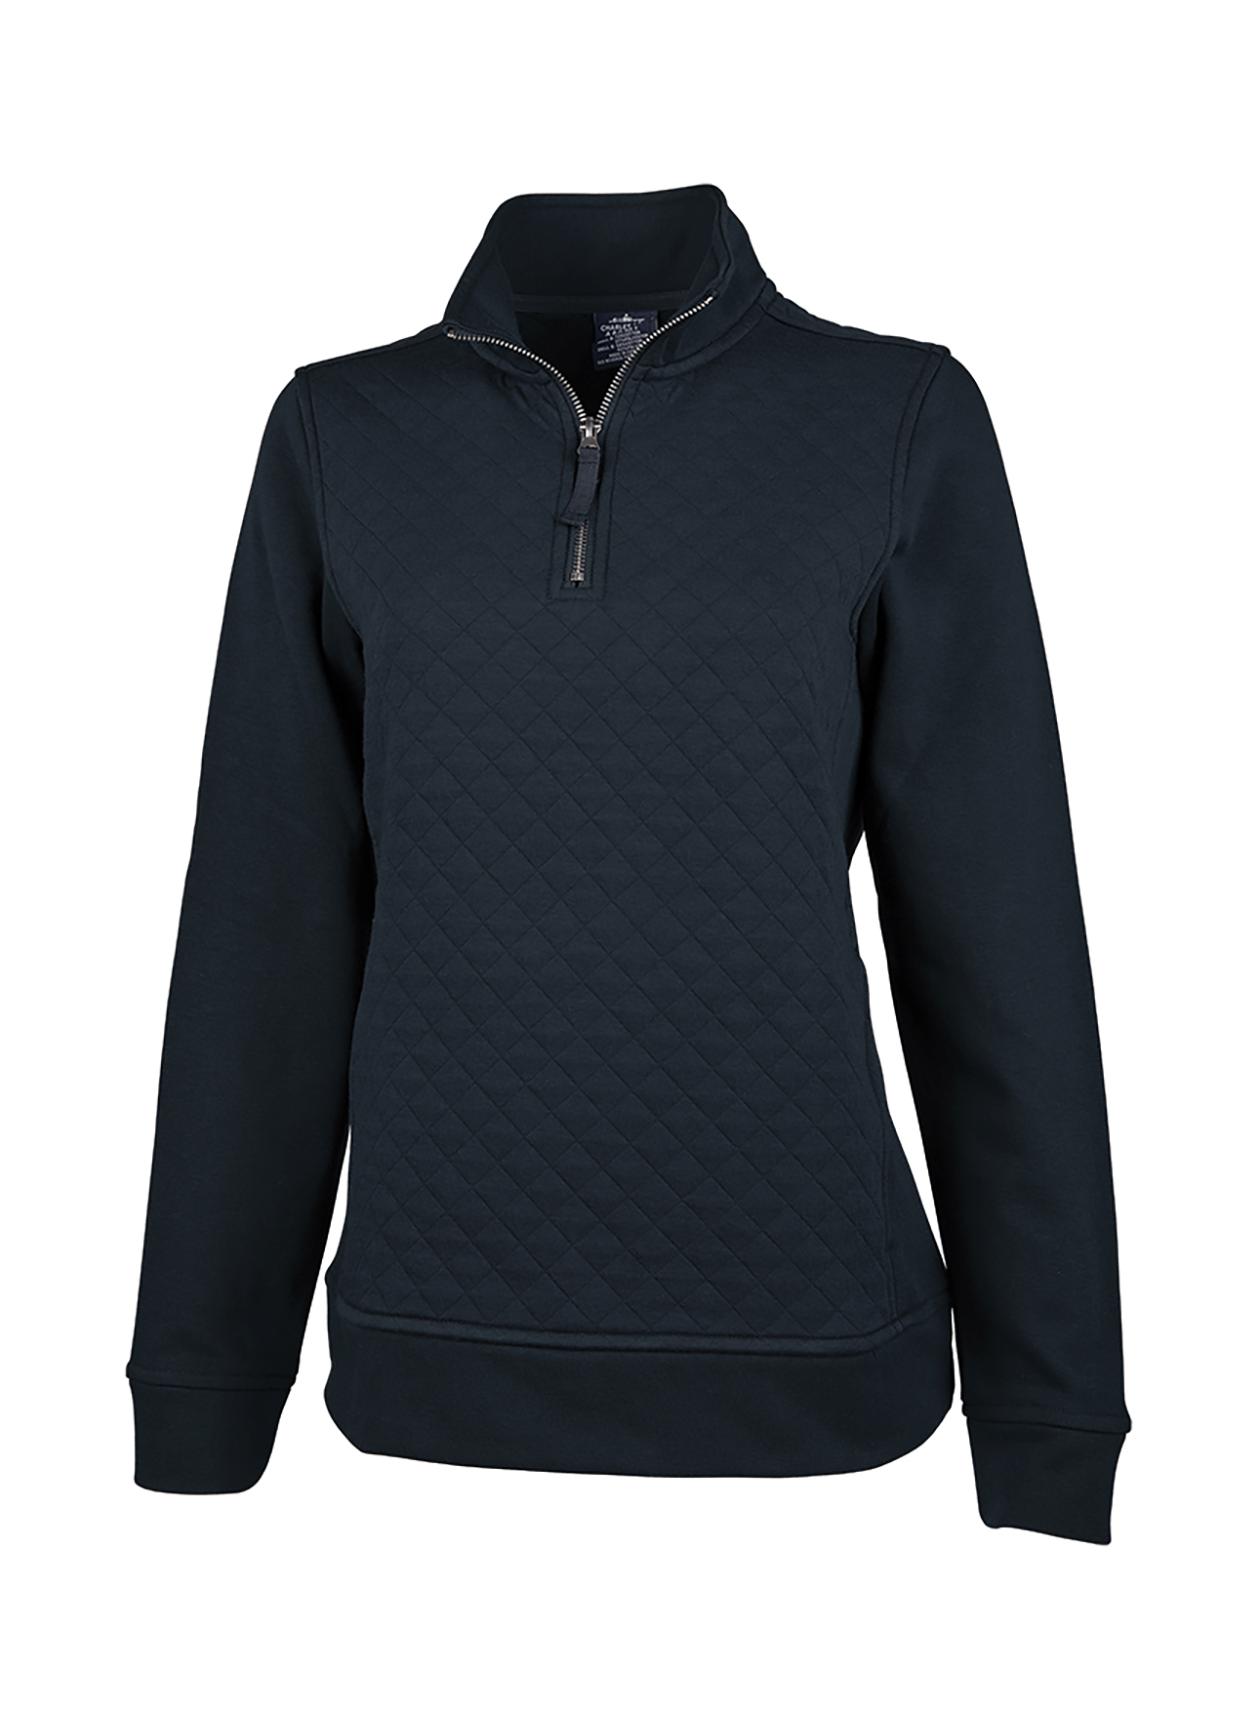 Charles River Women's Navy Franconia Quilted Quarter-Zip